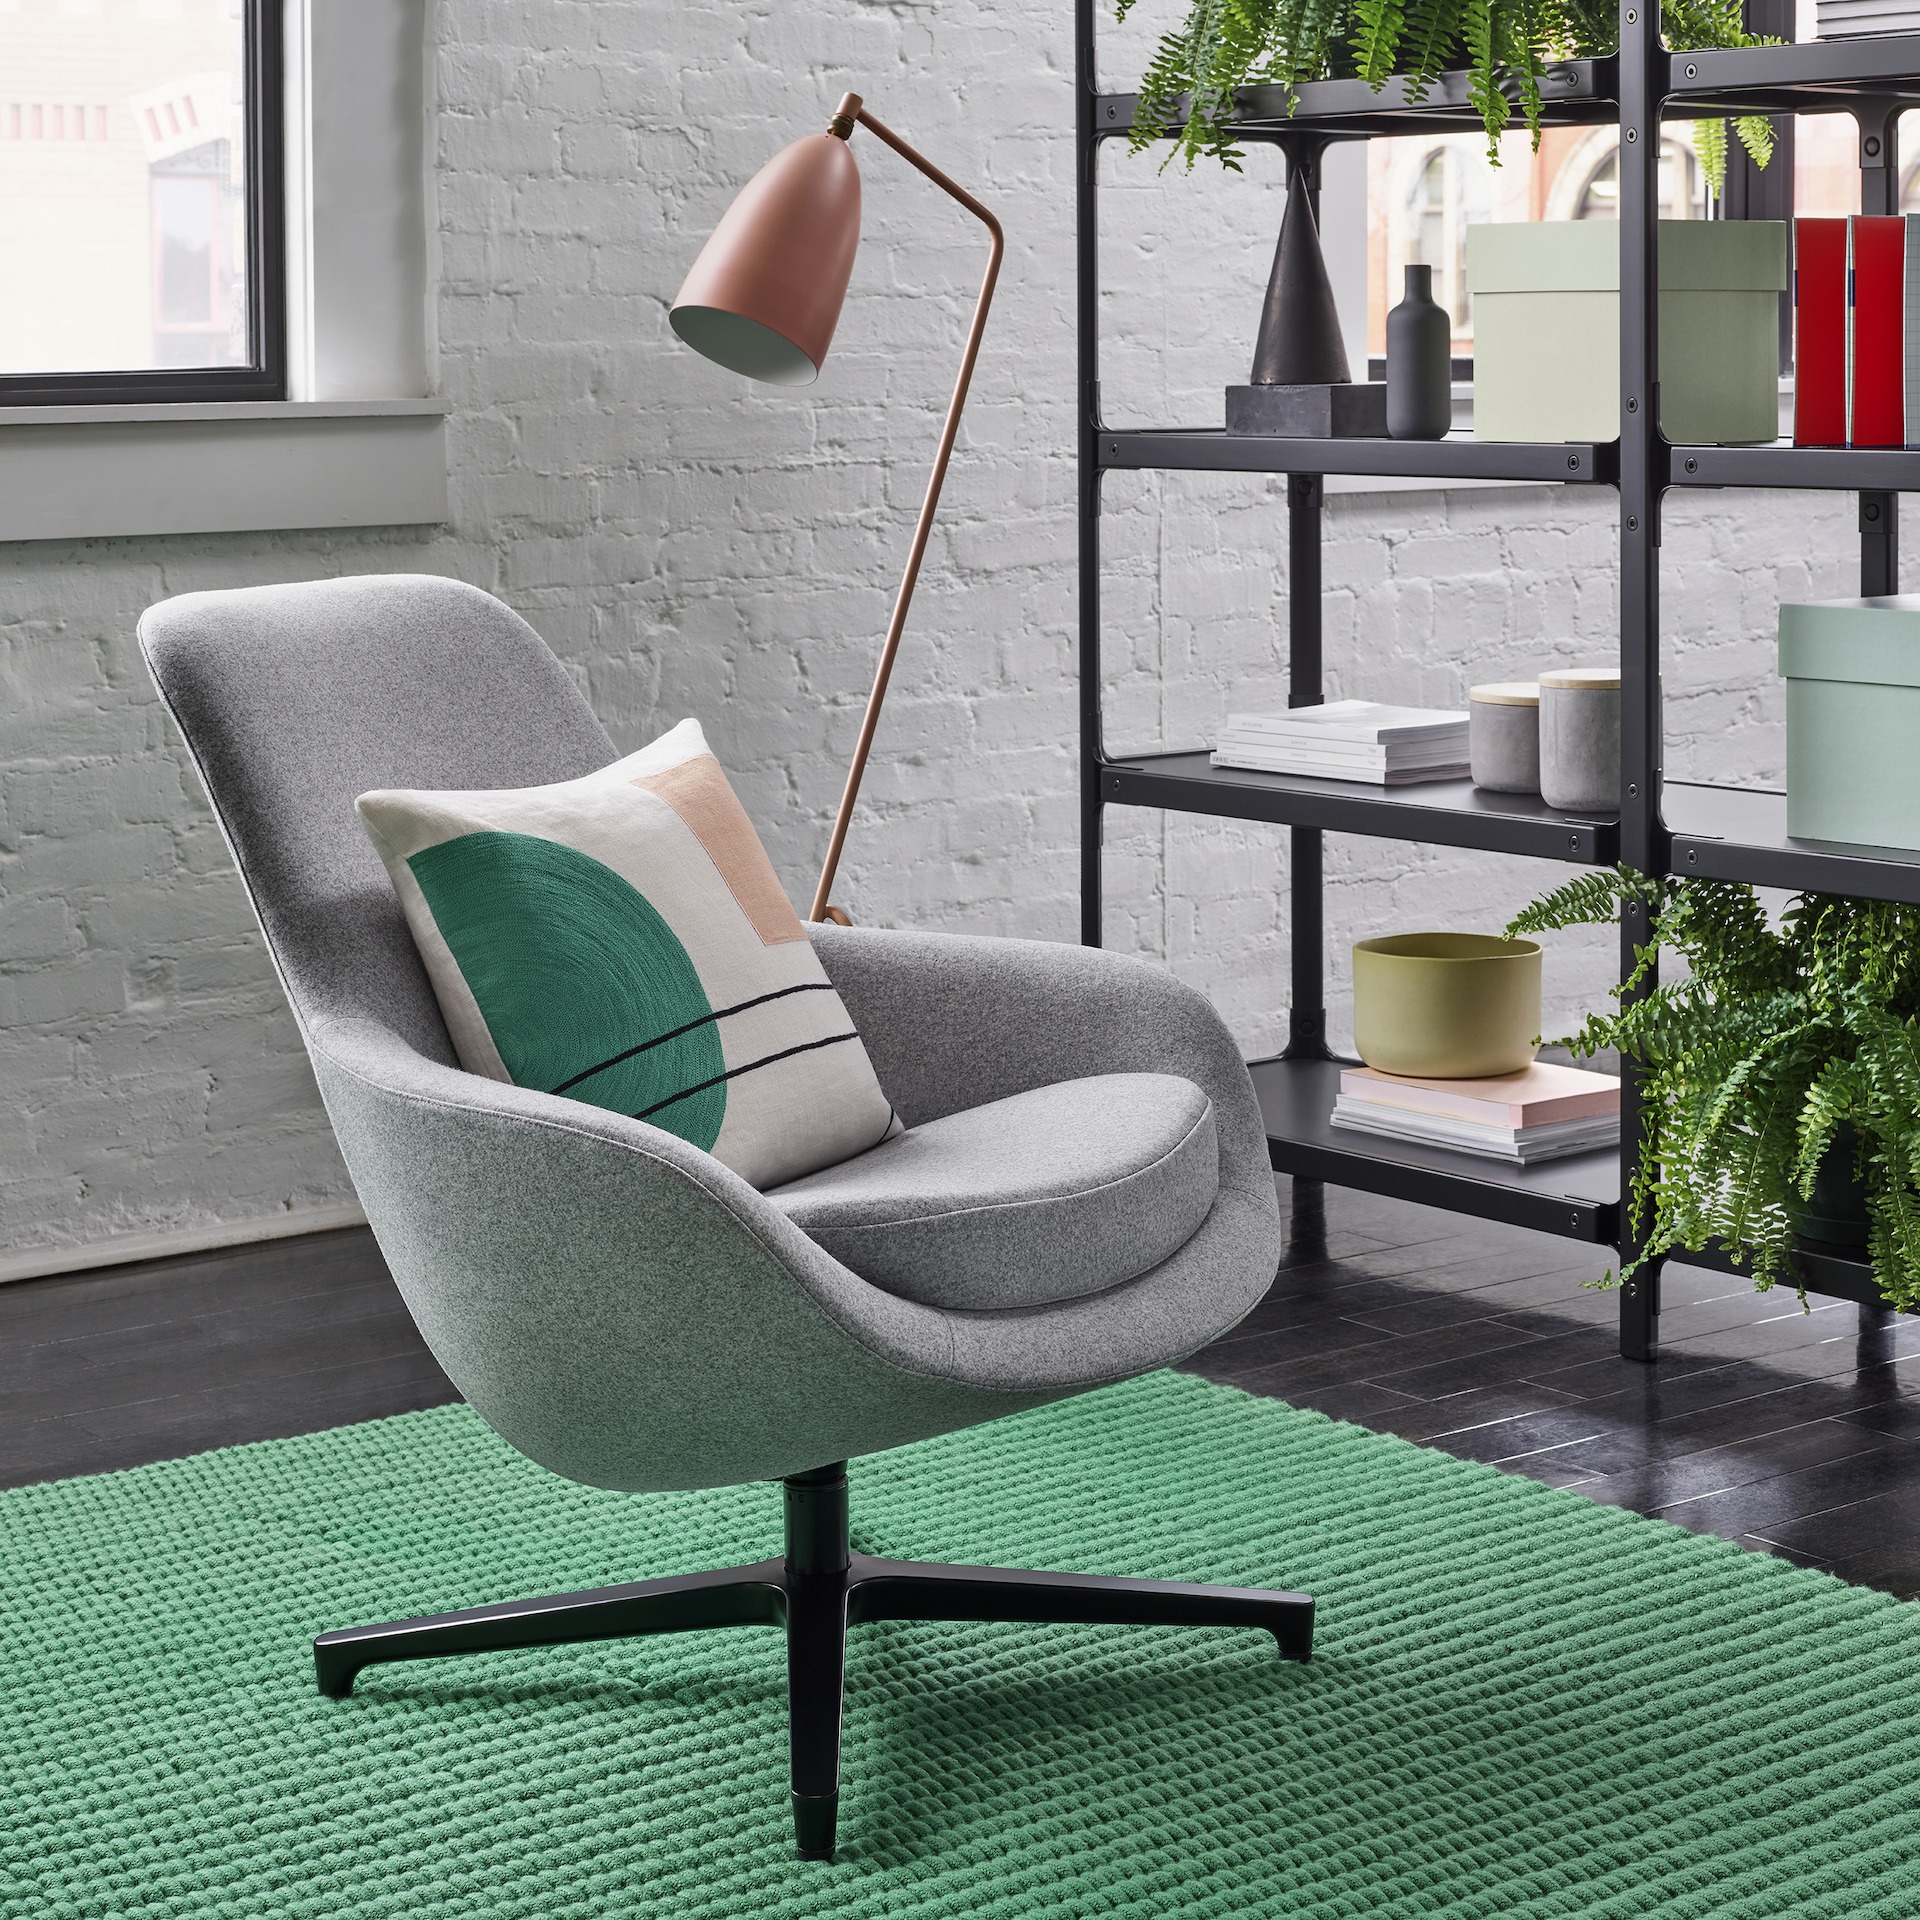 A light grey Saiba Lounge Chair with a black base on a green rug in front of  a black Steelwood Shelving System and a salmon Grasshopper Floor Lamp. The scene is set in front of a white wall with windows. 